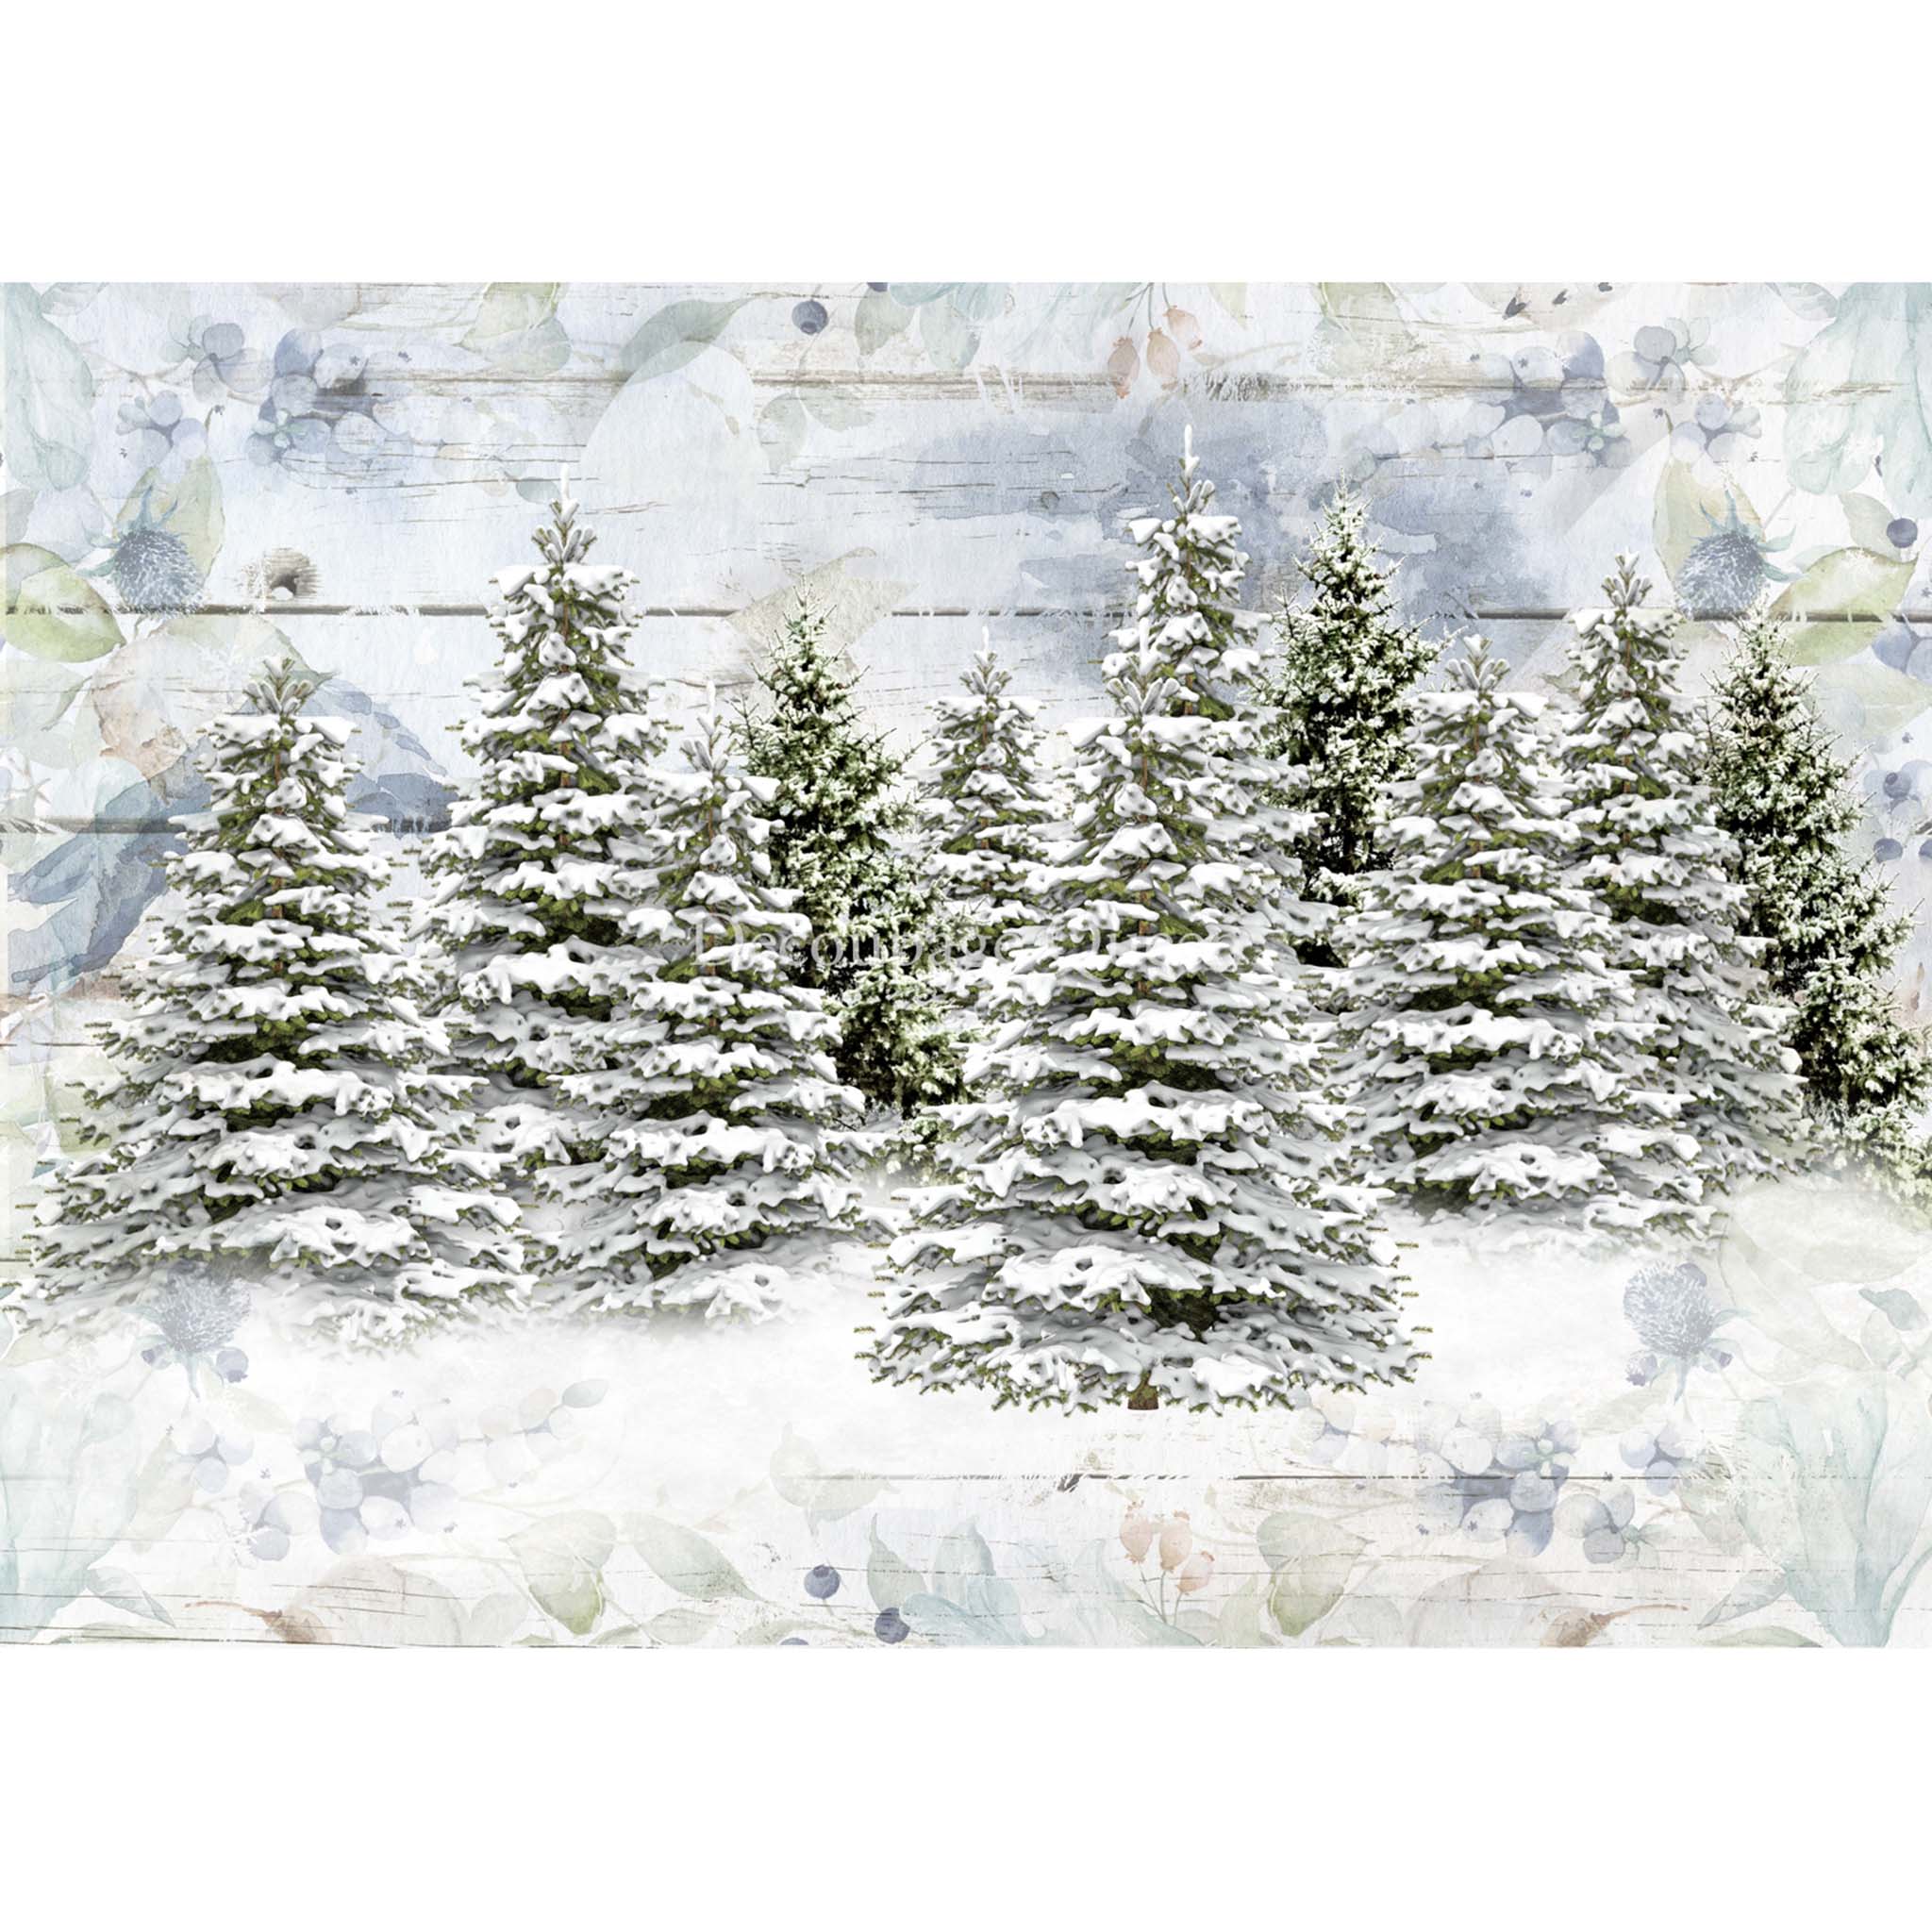 Woodland Trees A3 Rice Decoupage PaperA3 rice paper design featuring a snowy scene full of pine trees. White borders on the top and bottom